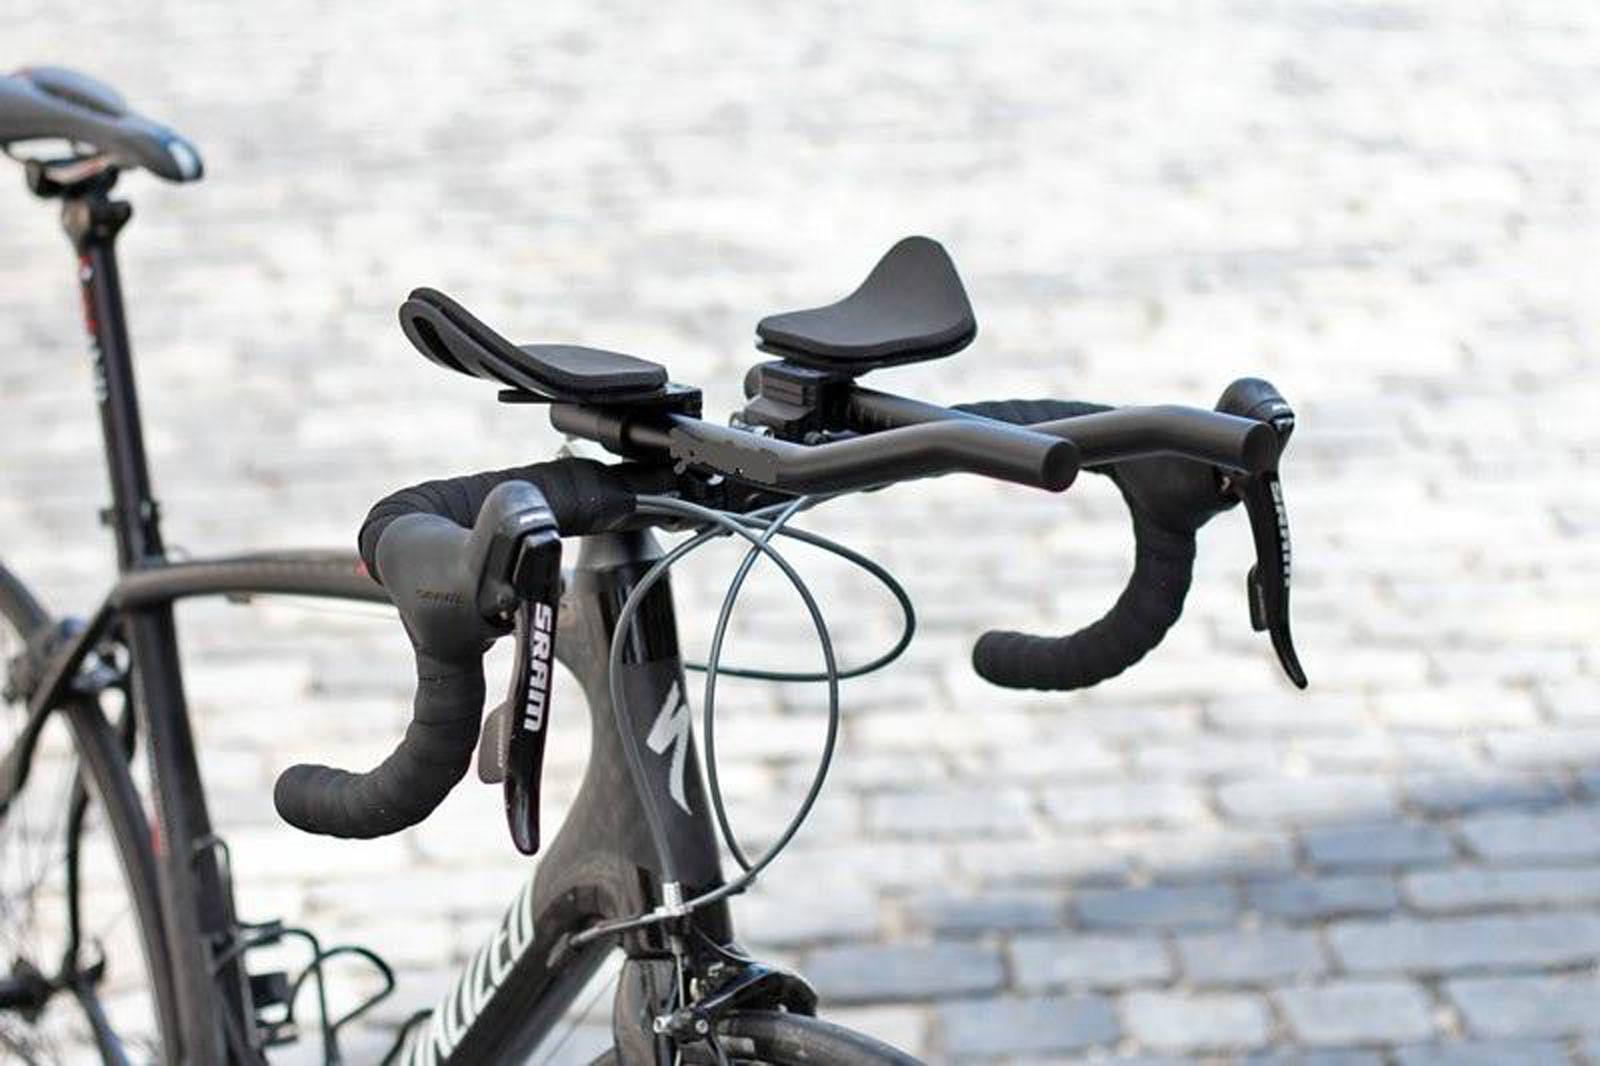 cervelop clip-on extension aero bars for time trial triathlon racing